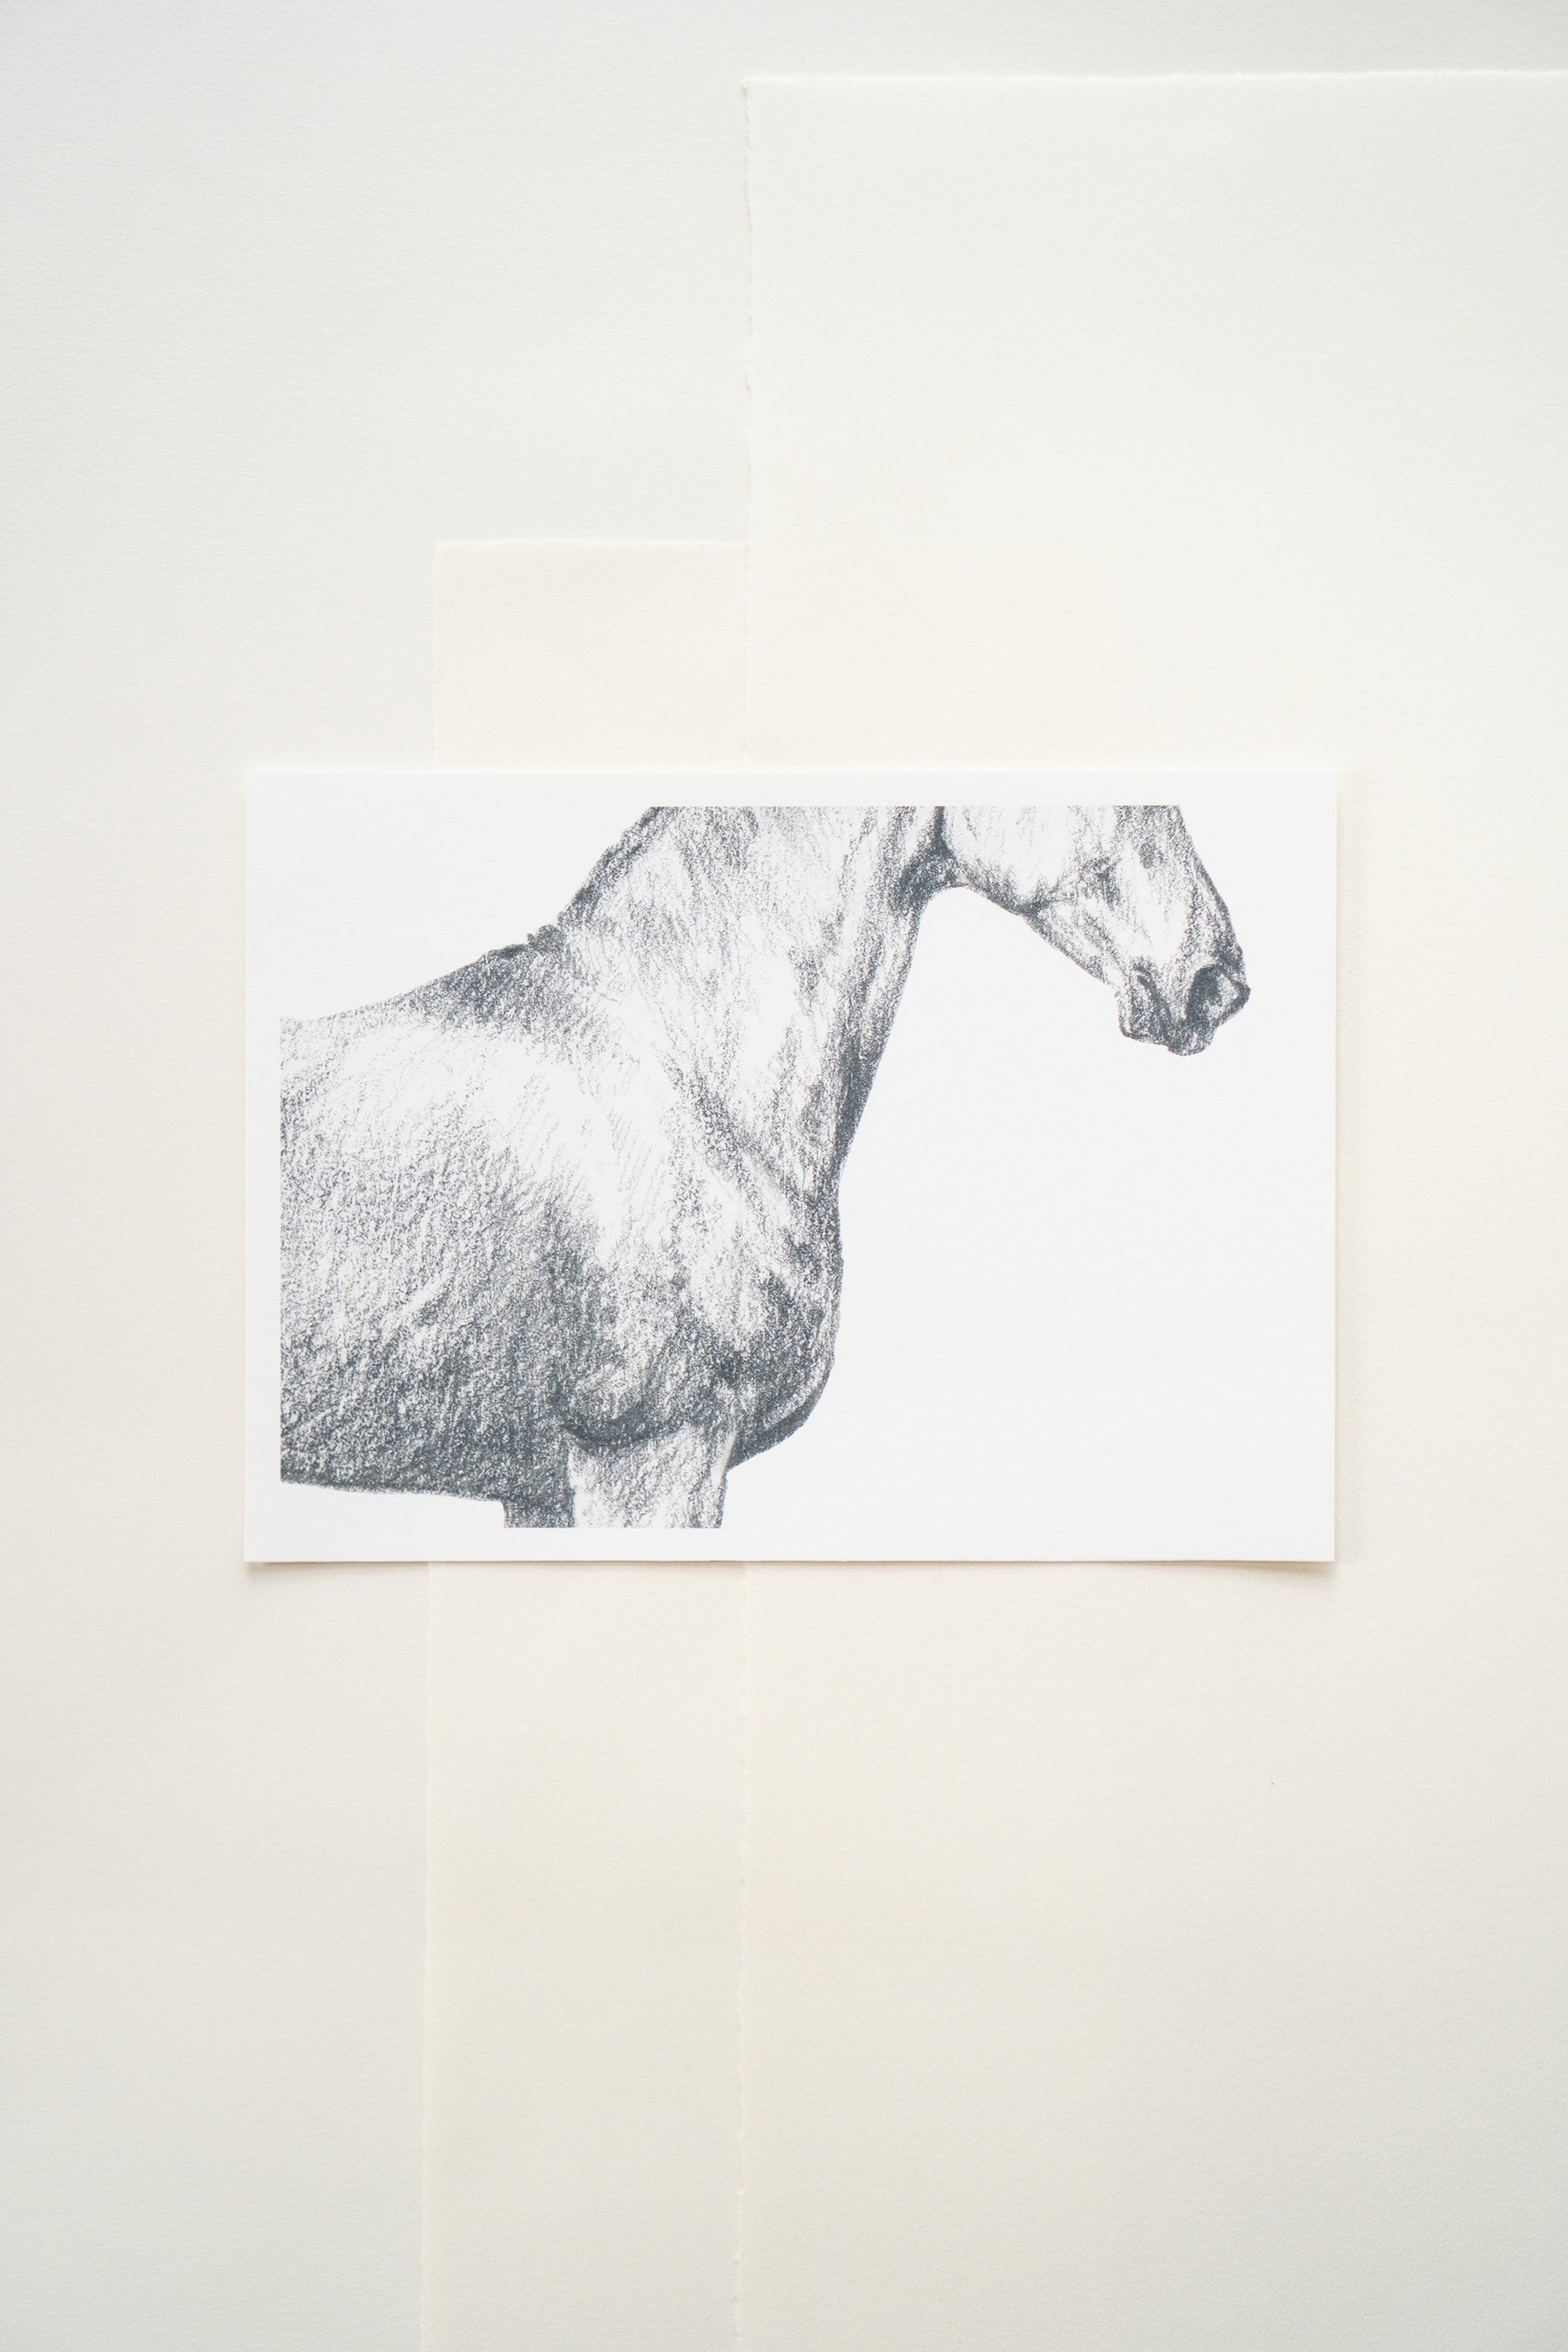 Danielle Demers "Clarity" Horizontal Horse Print on Paper